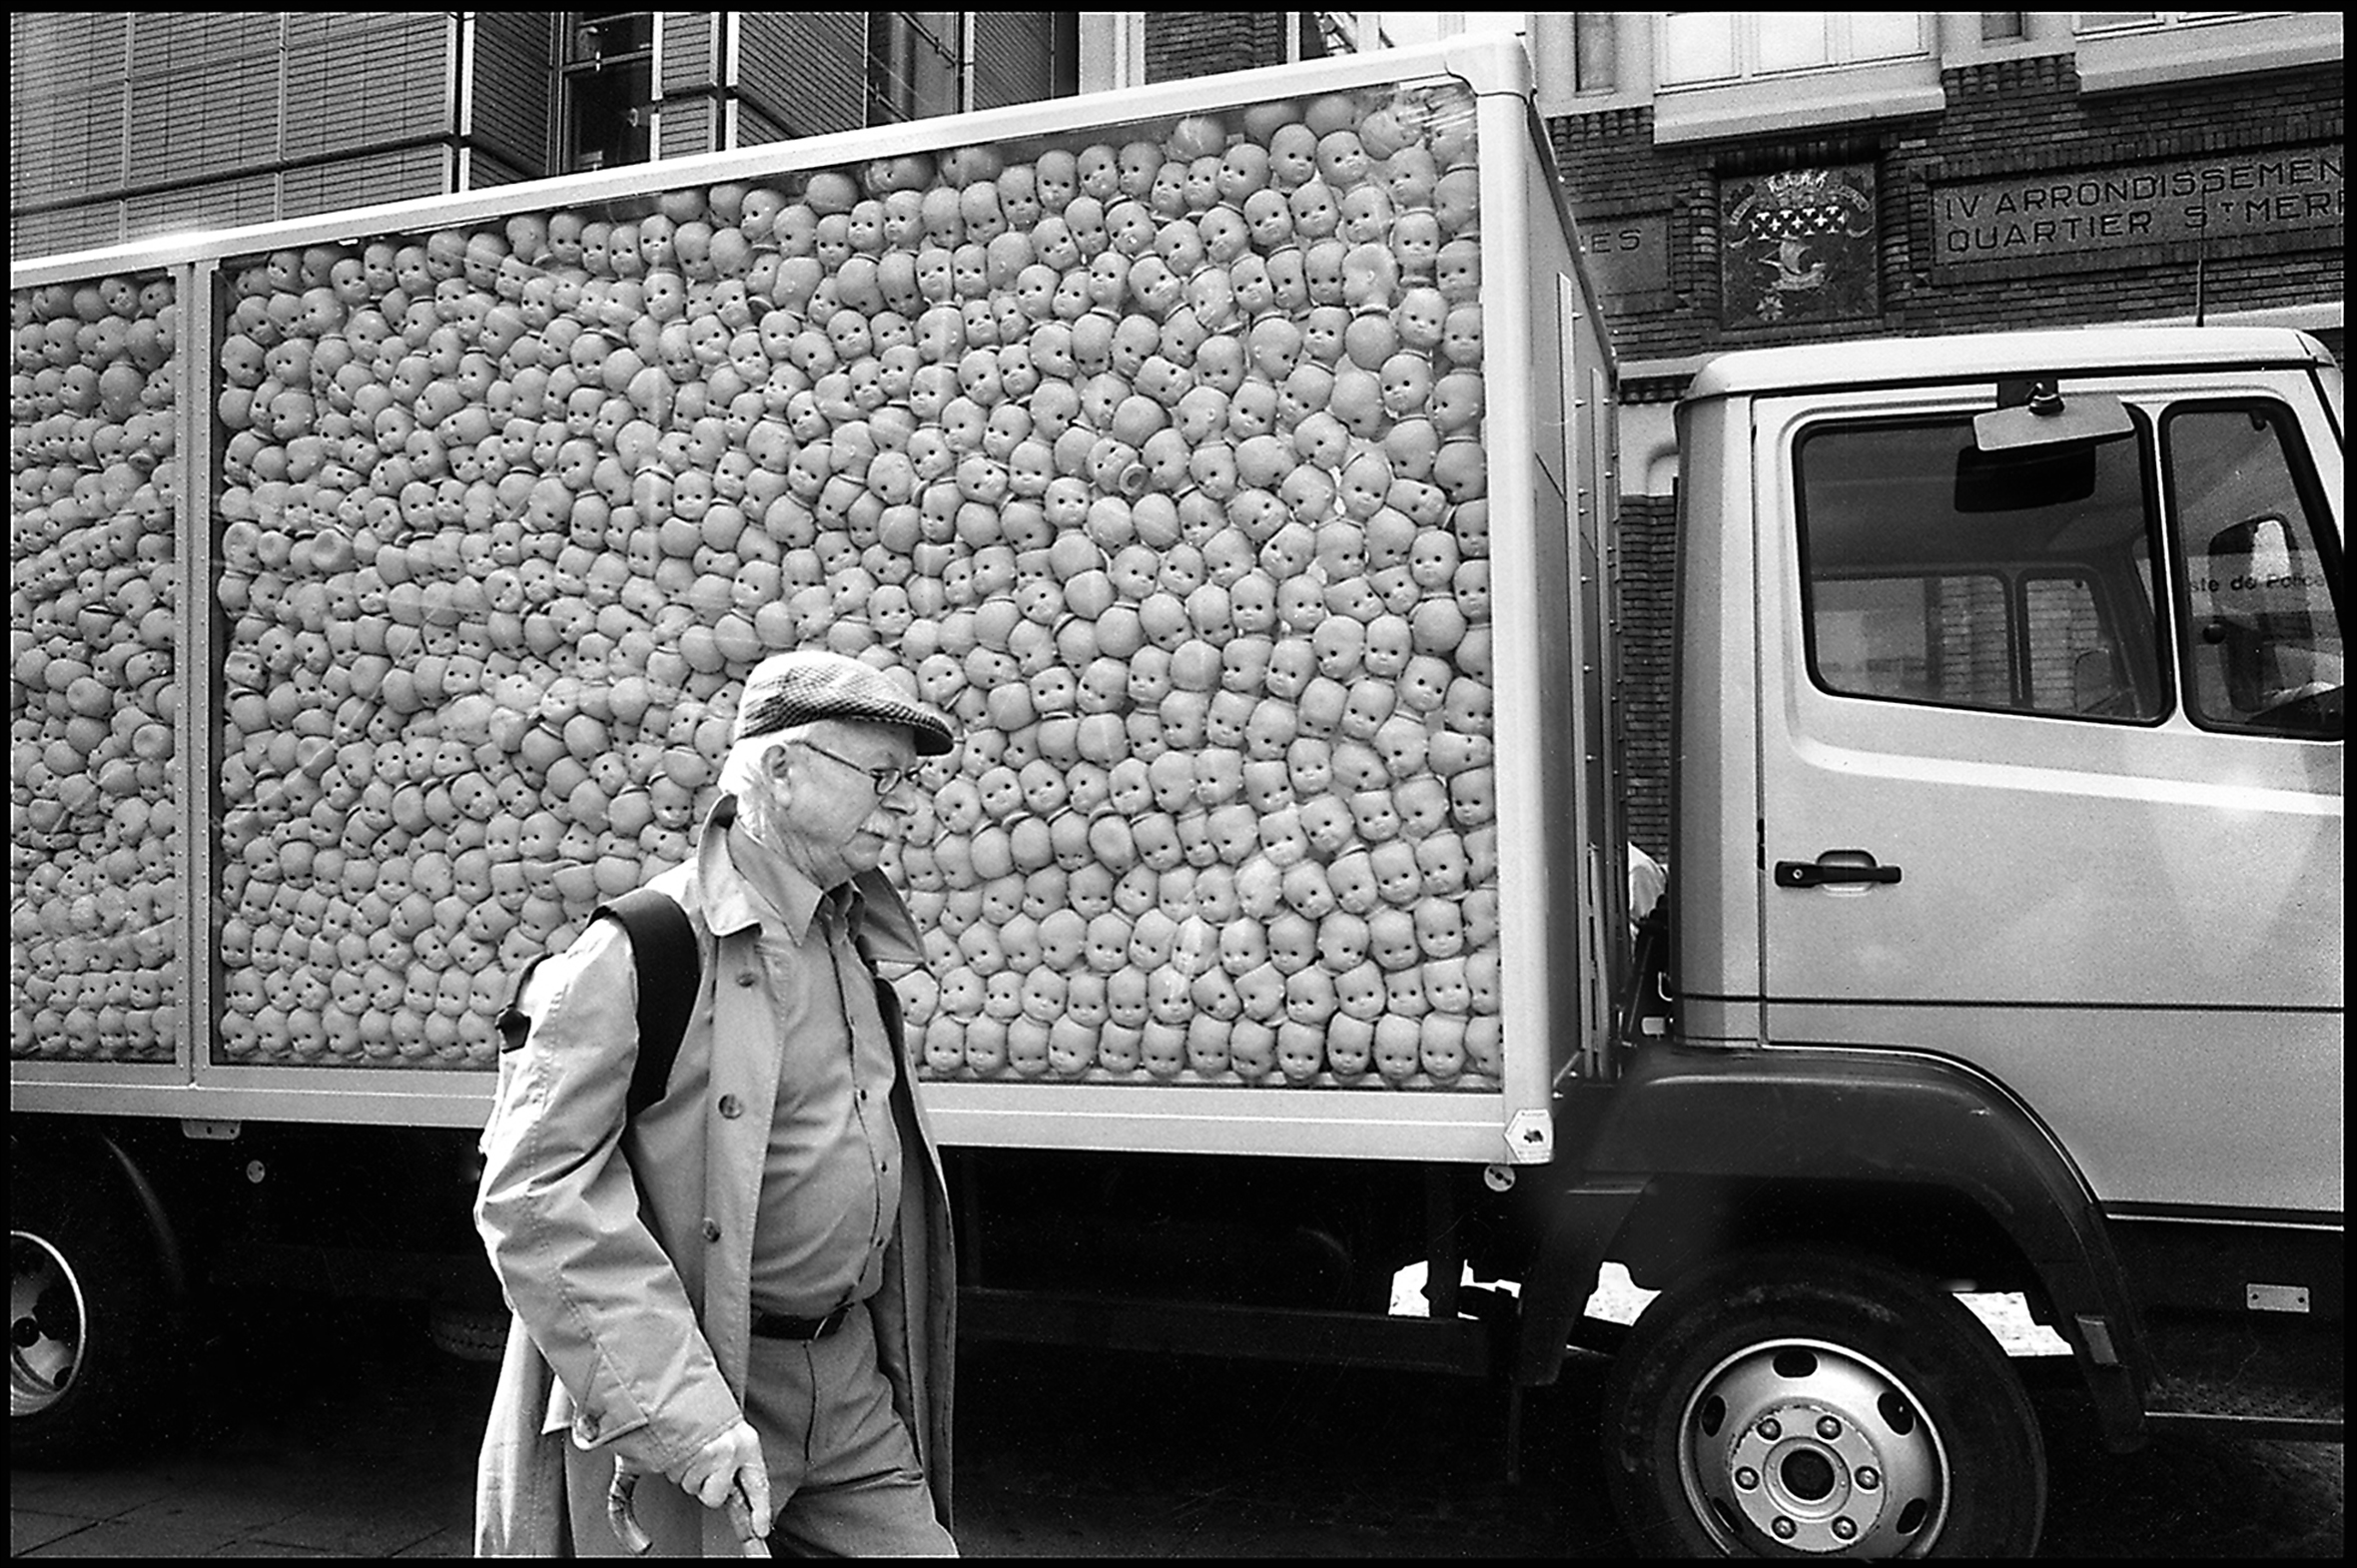 An old man with a cap and gray hair peeking out and a gray moustache is walking by the transparent side of a delivery truck filled with hundreds of identical small, white, bald, doll heads staring out.